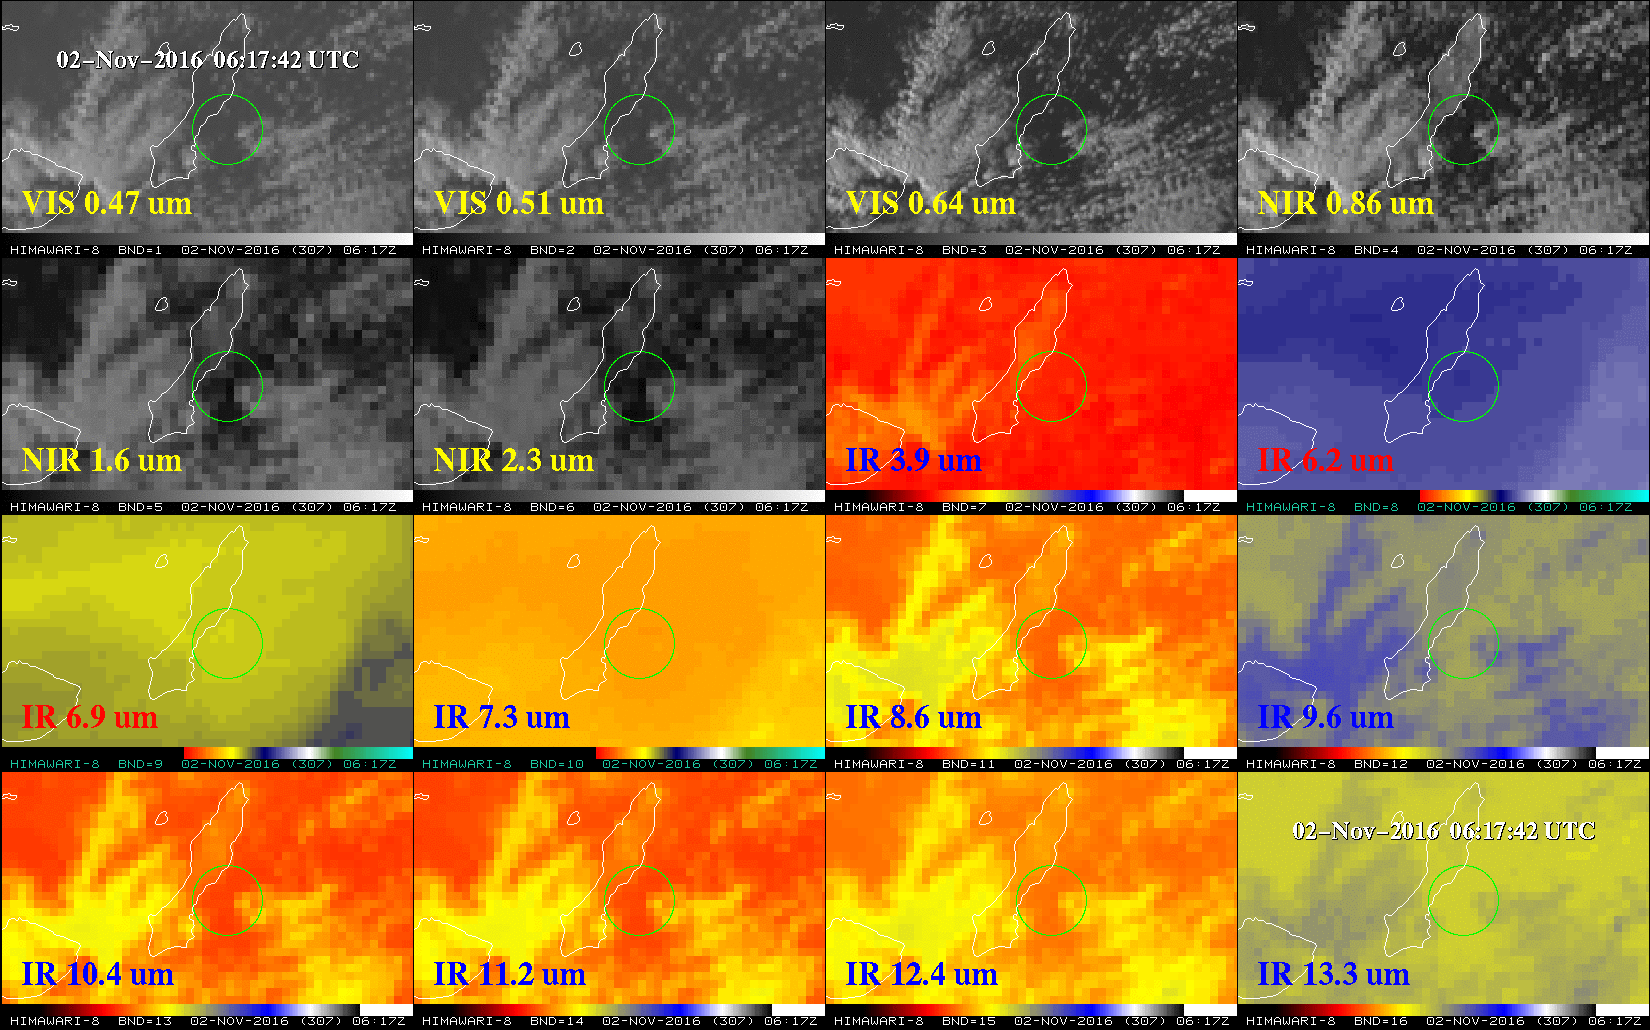 Himawari-8 imagery of all 16 AHI Channels, as indicated, bracketing the launch time of Himawari-9 (Click to enlarge)